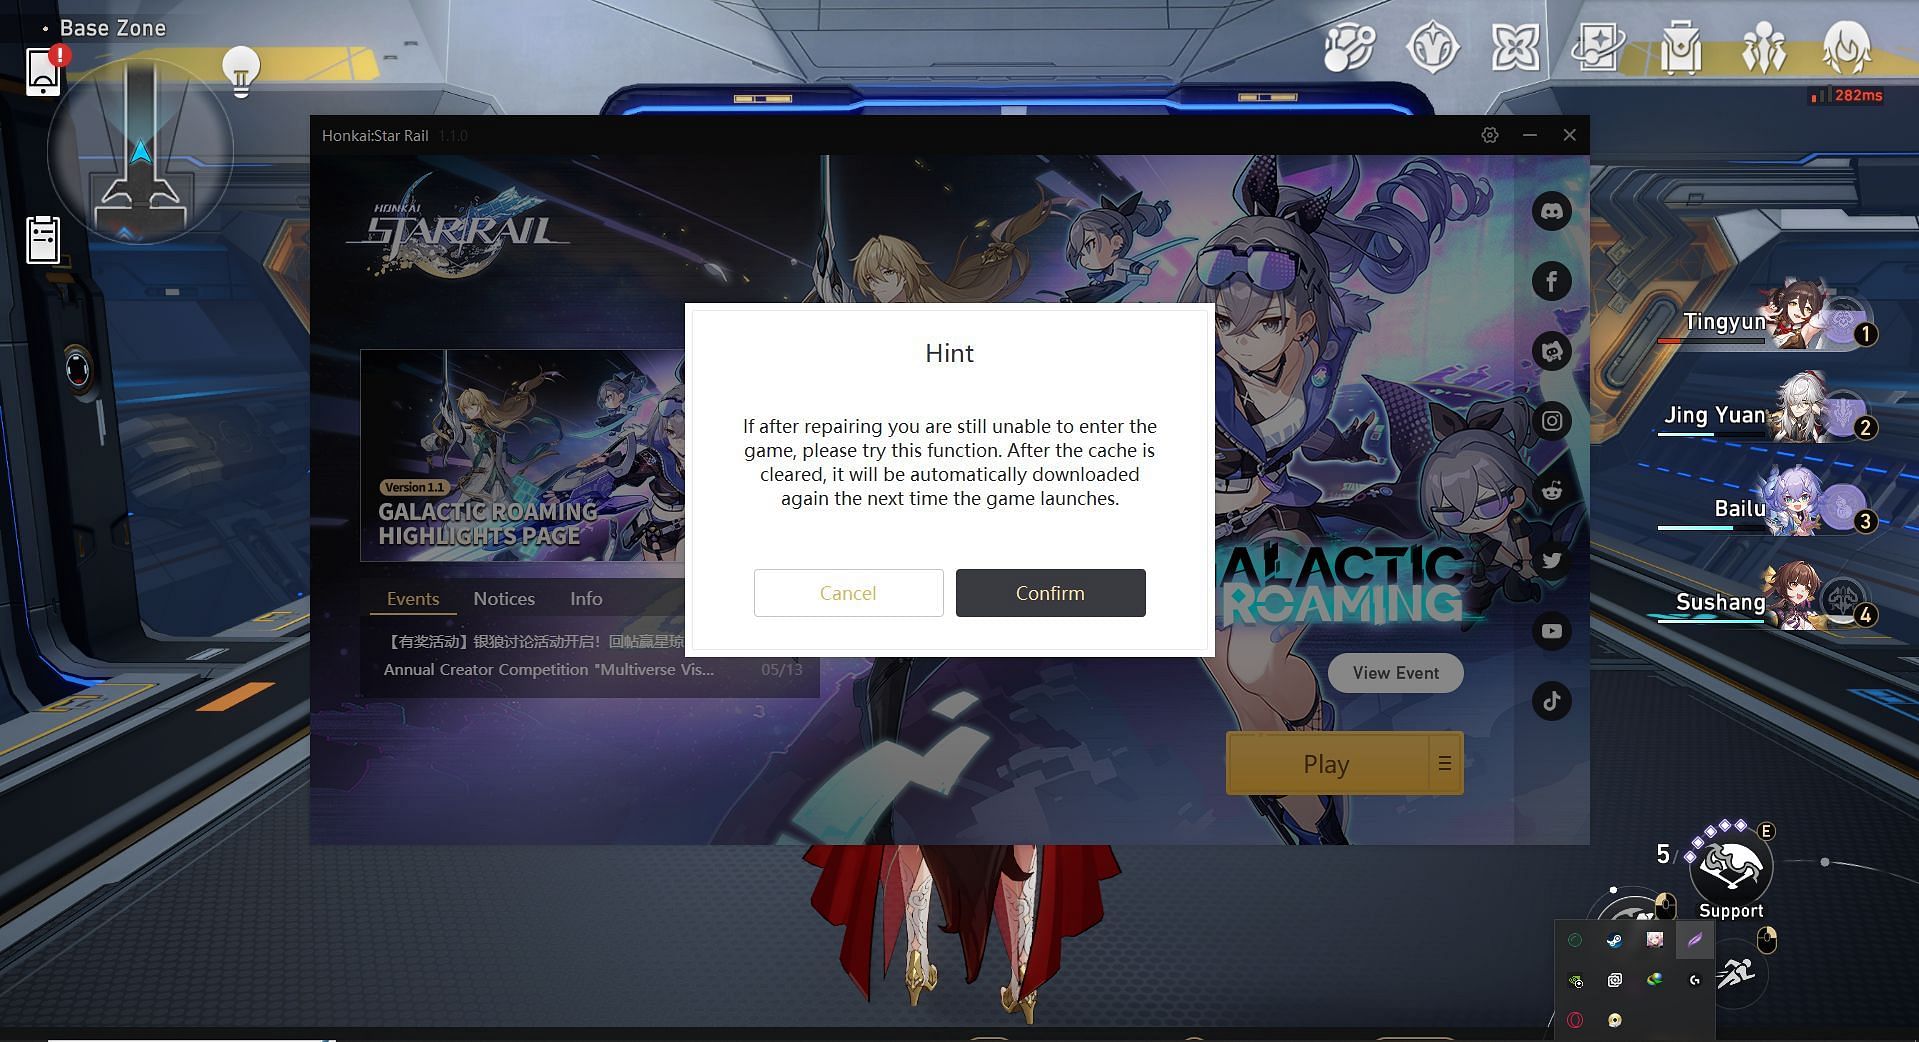 How to Fix “Game files download error” in Honkai Star Rail 